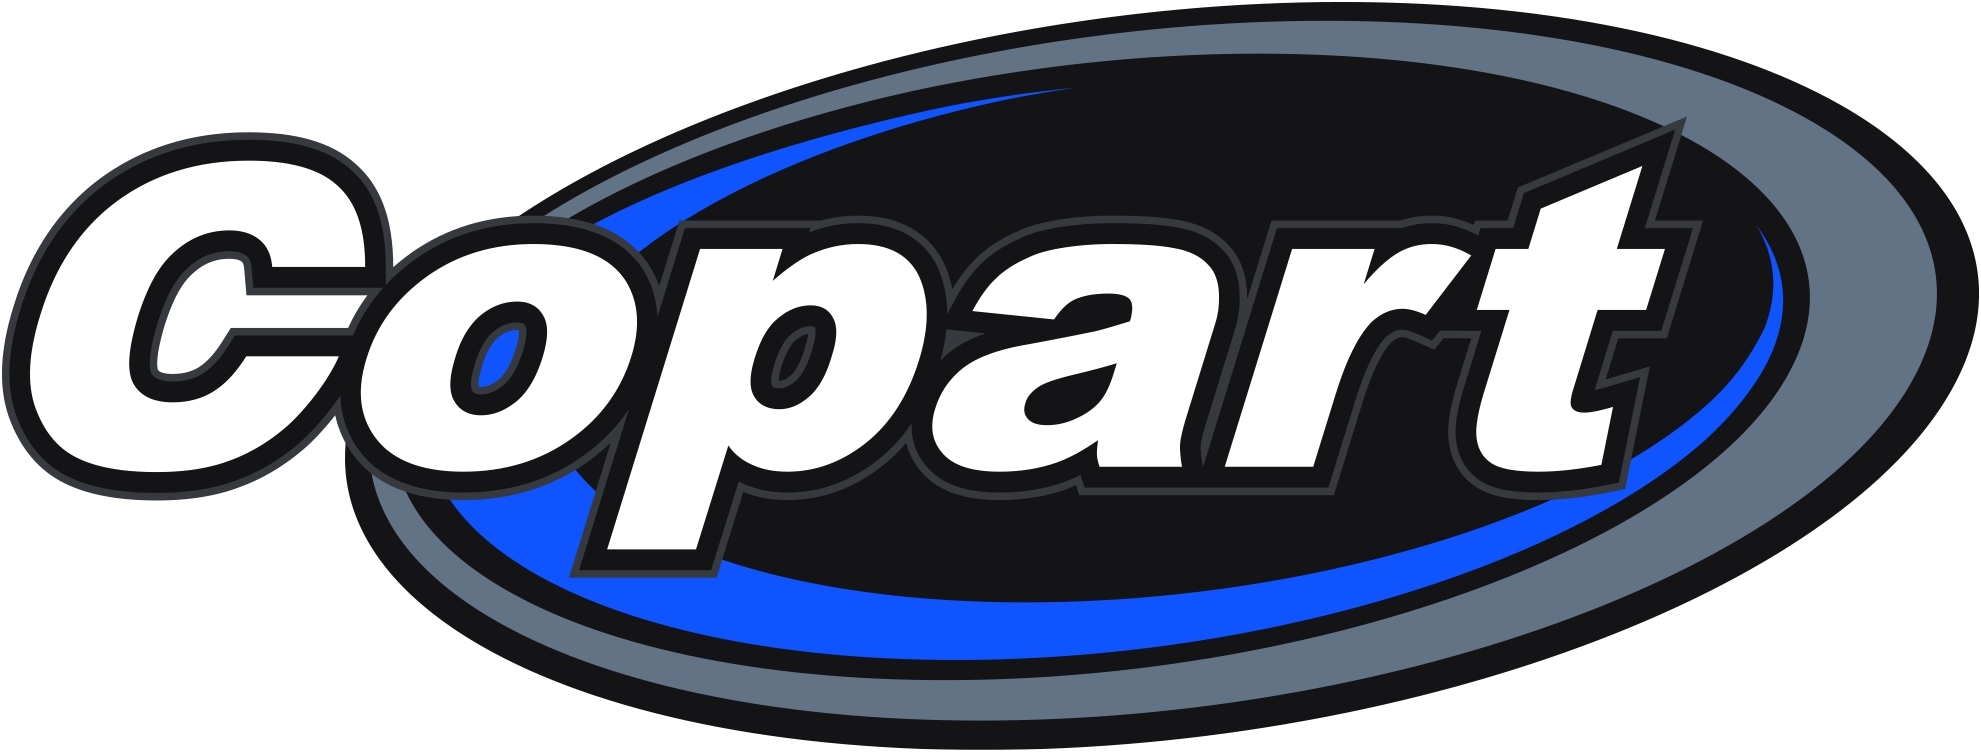 Copart USA - Leader in Online Salvage & Insurance Auto Auctions